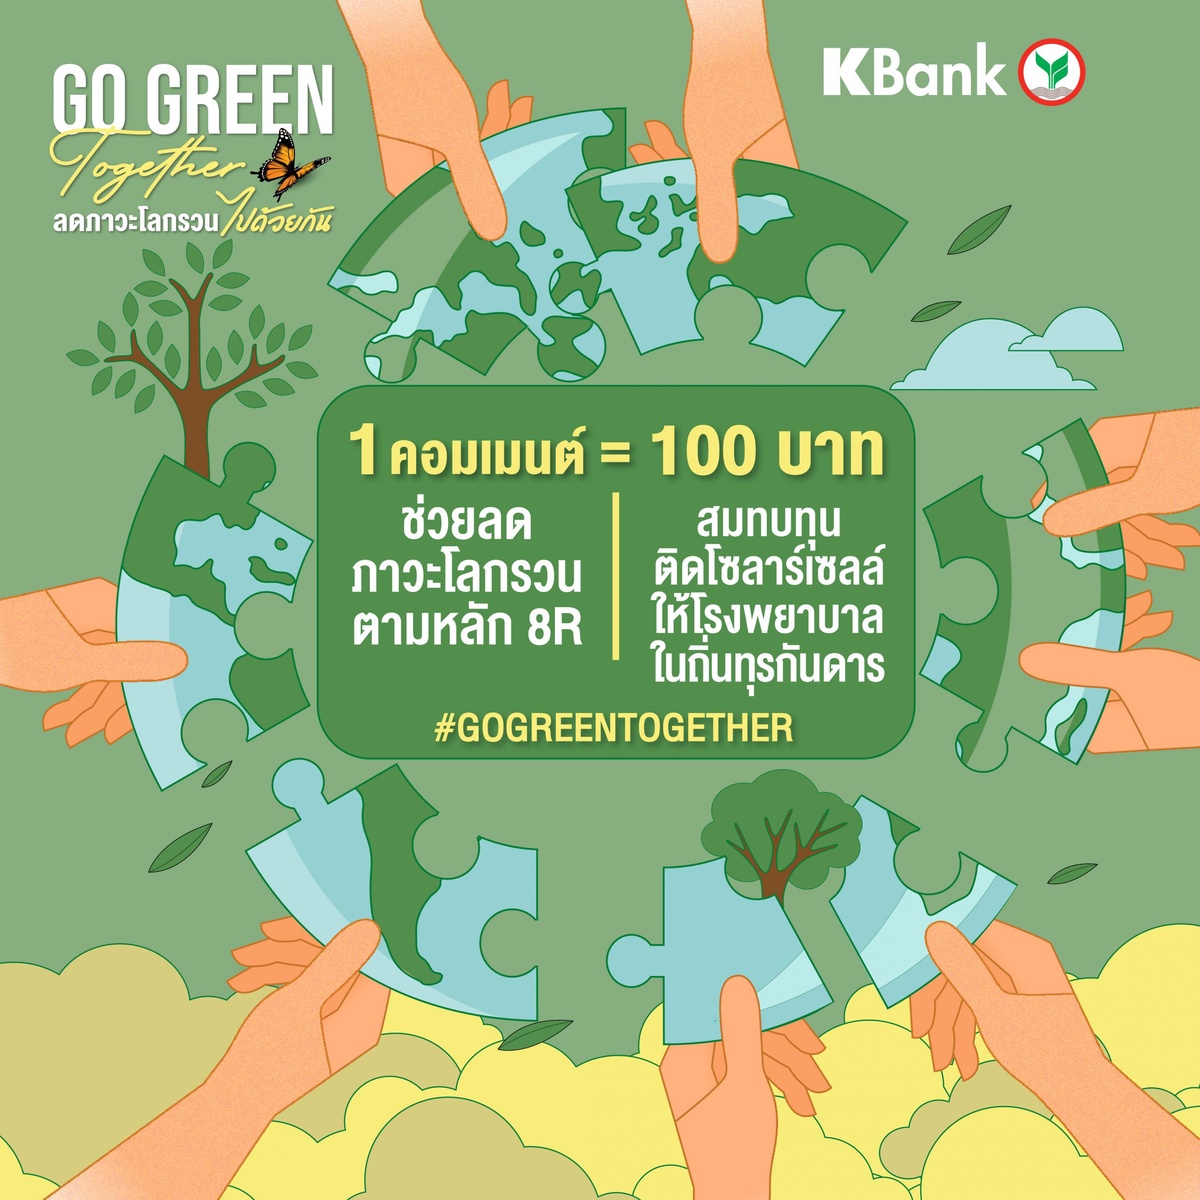 KBank invites all Thais to join the GO GREEN TOGETHER: Let's Unite to Fight Climate Change campaign by sharing a Going Green